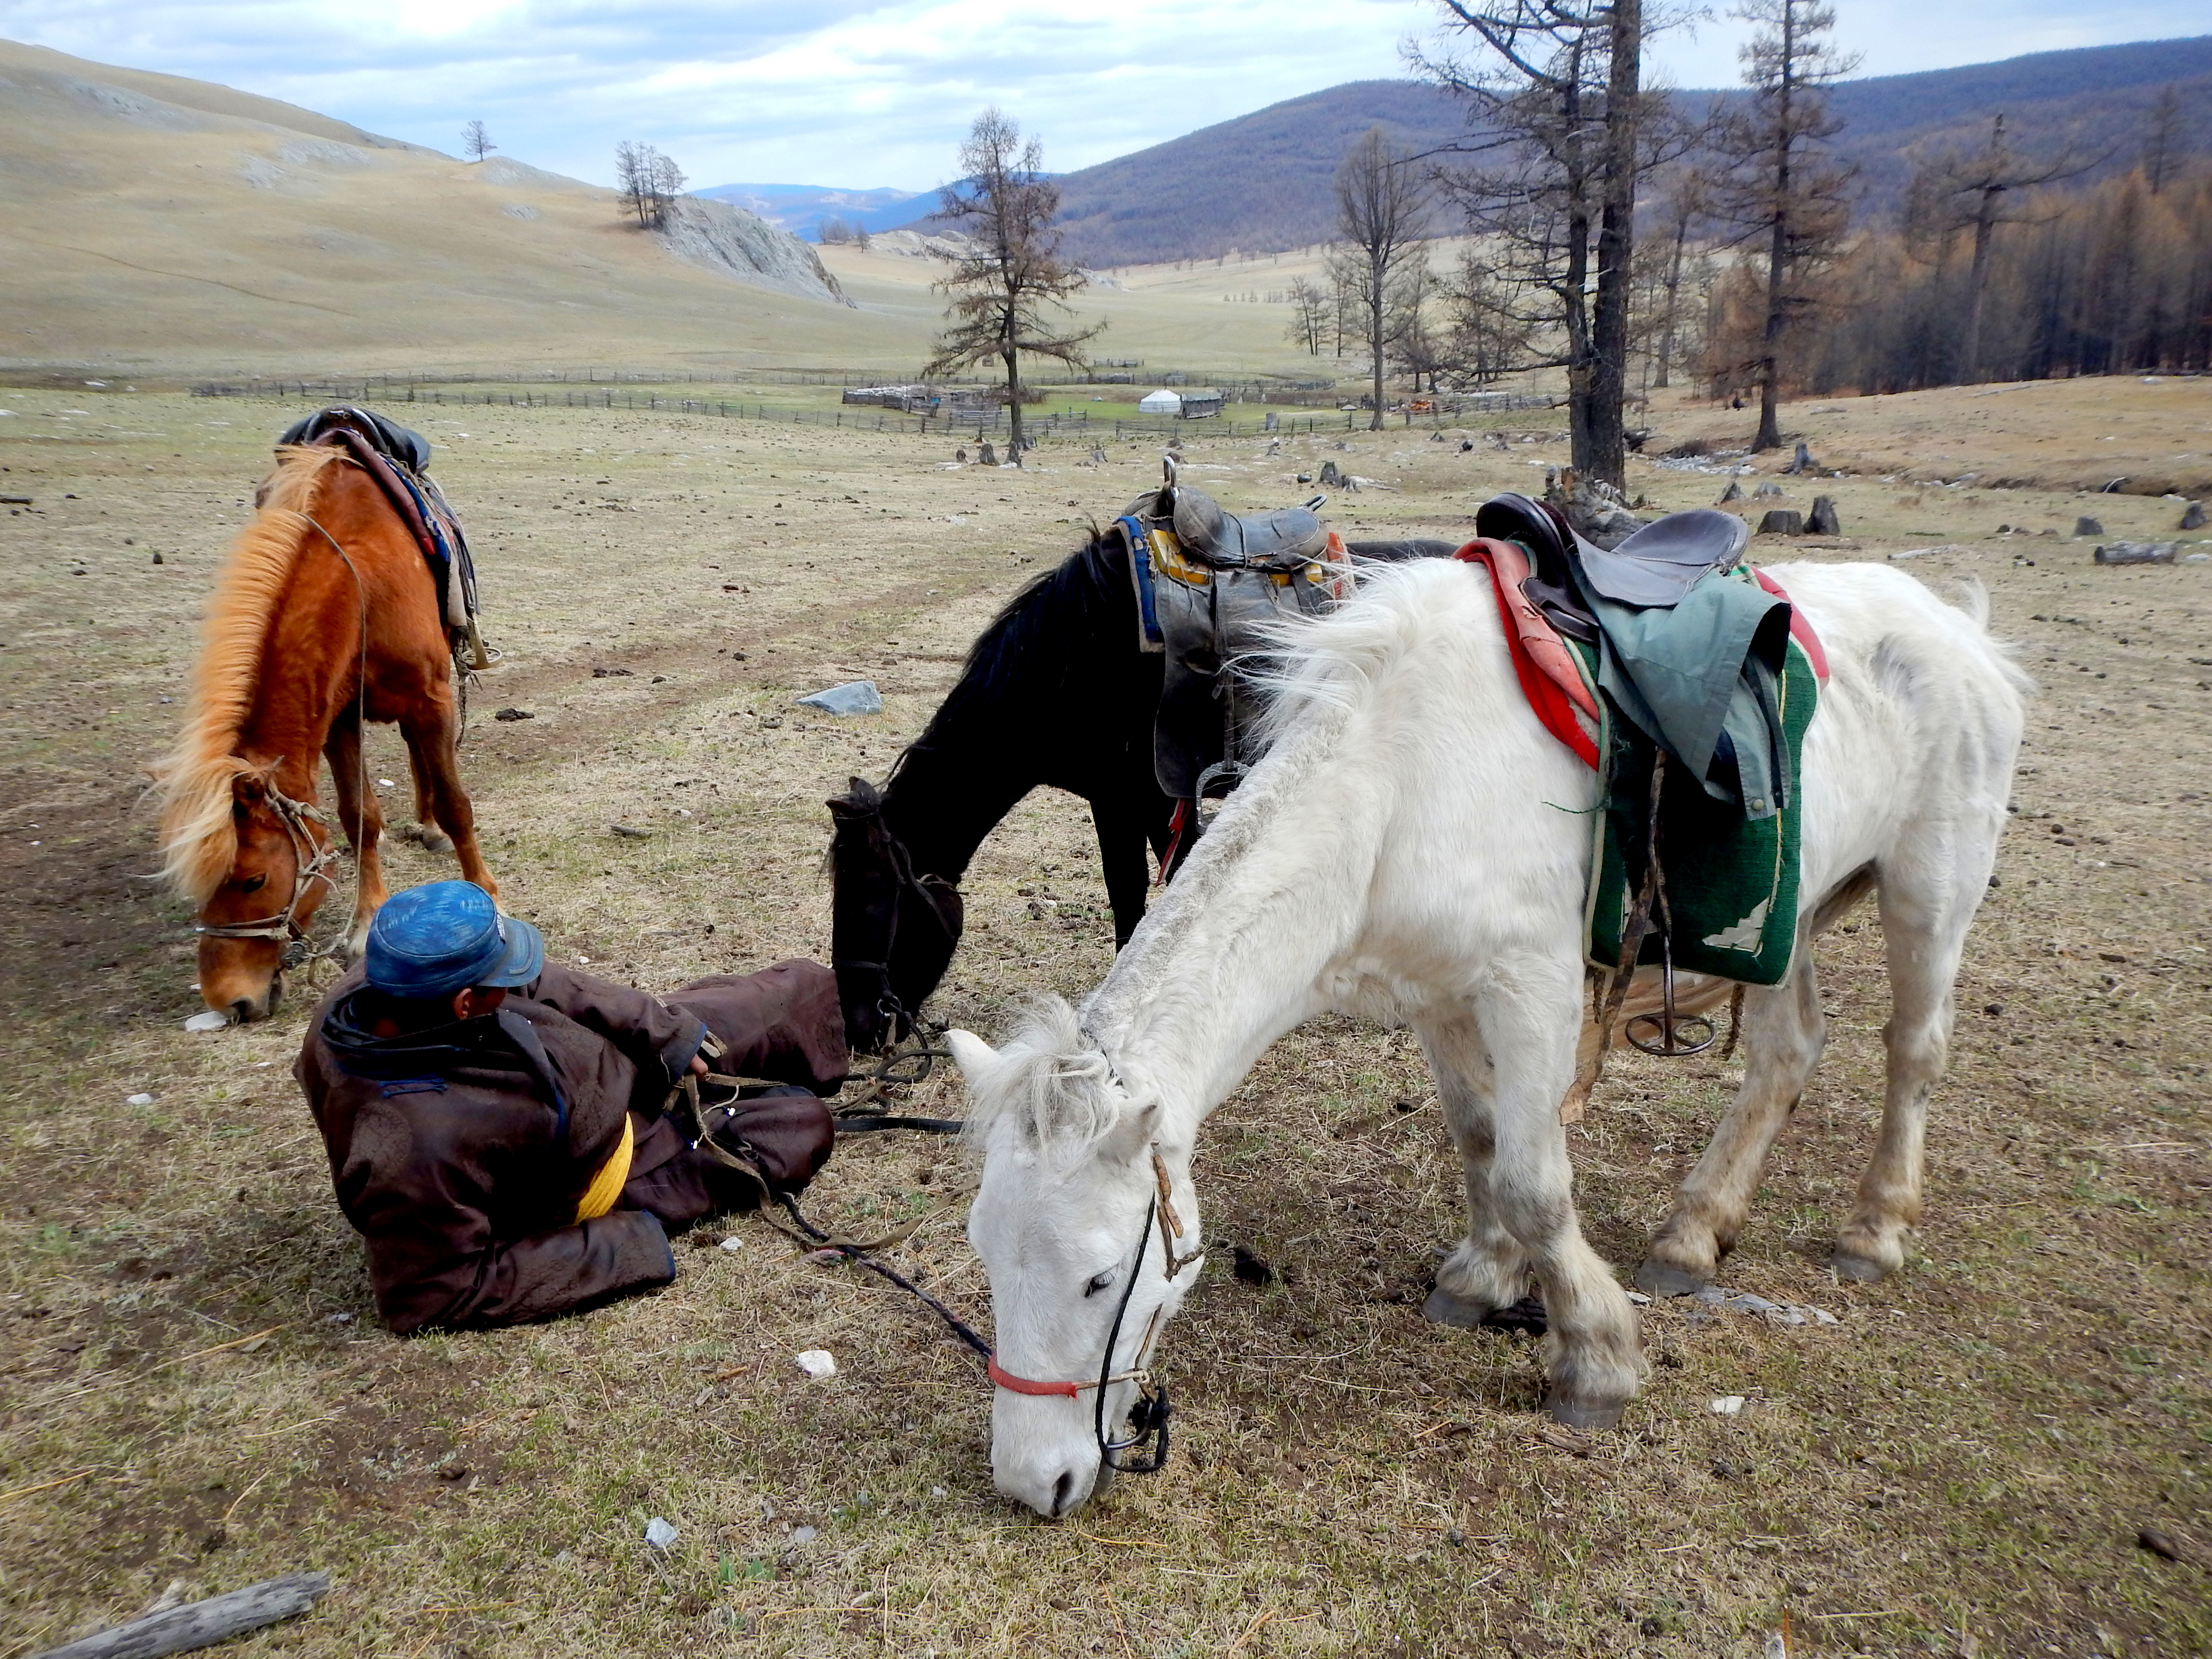 Our trekking guide, resting with the horses. Northern Mongolia.